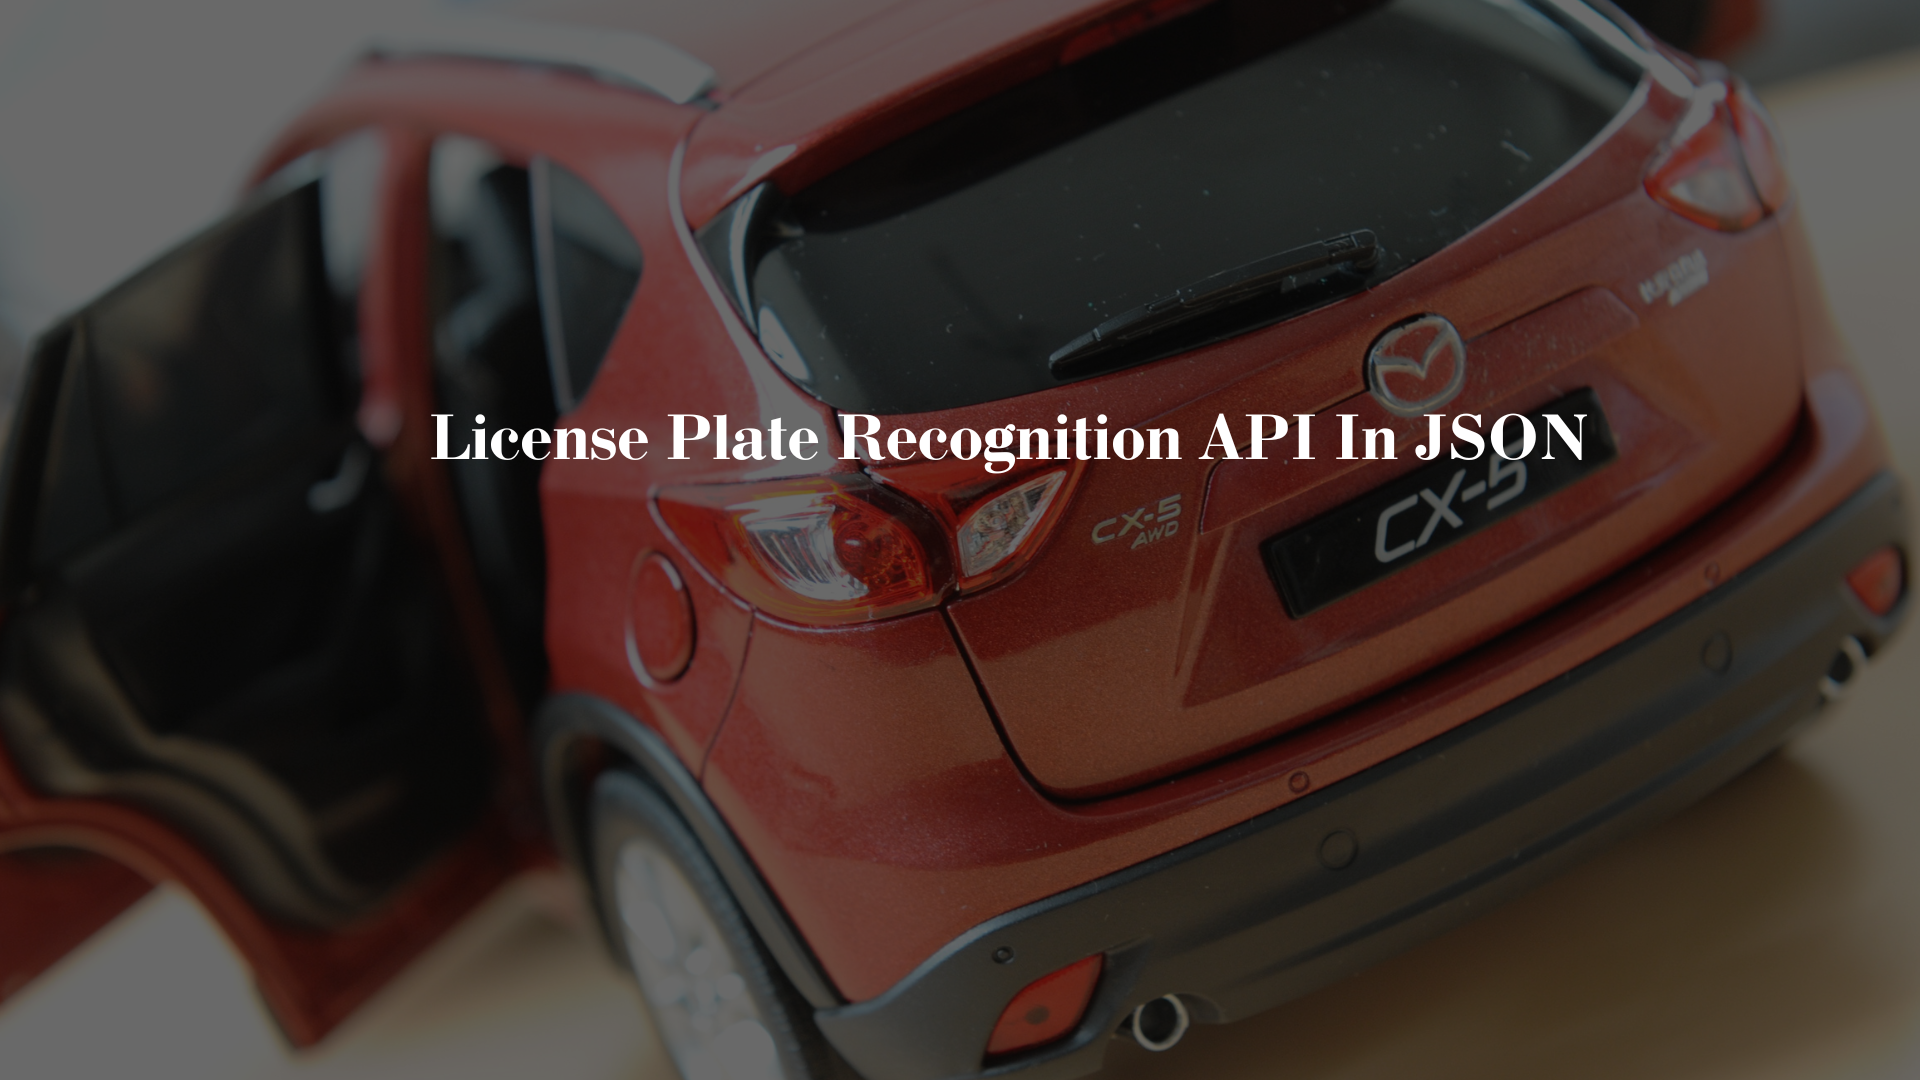 License Plate Recognition API In JSON